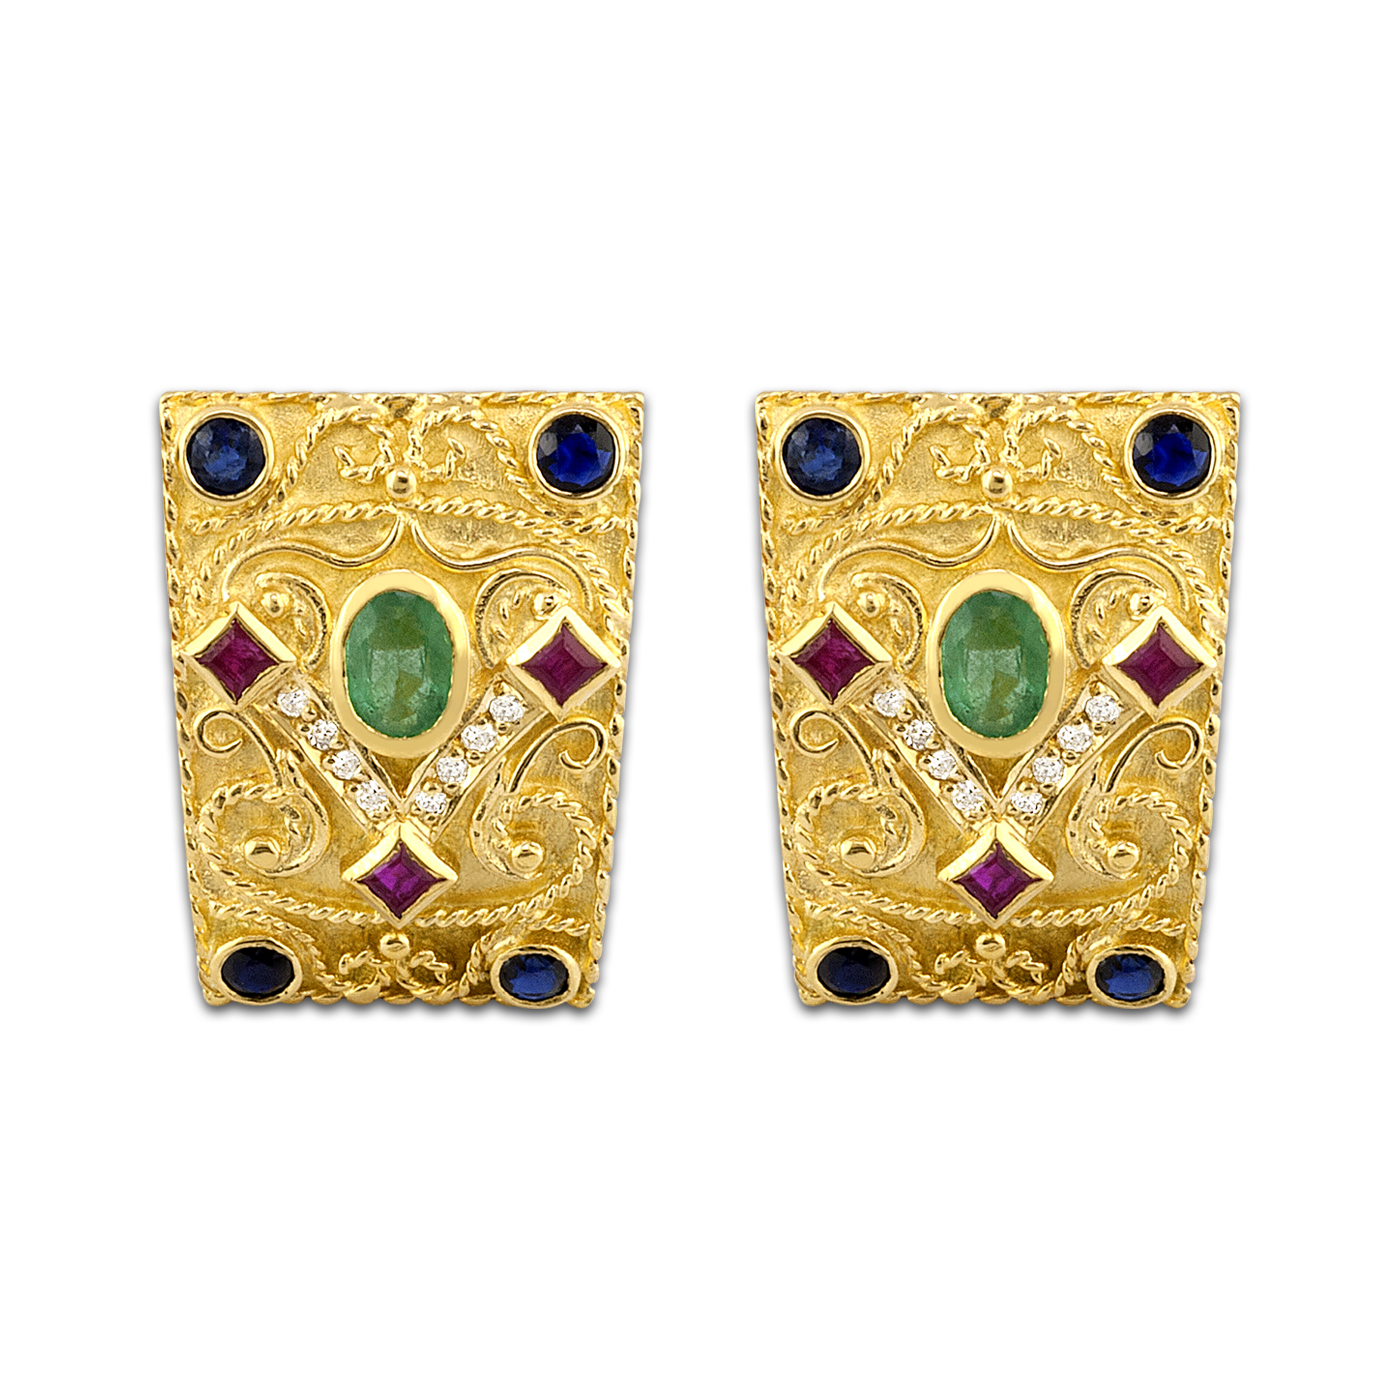 Imperial gold earrings with precious stones